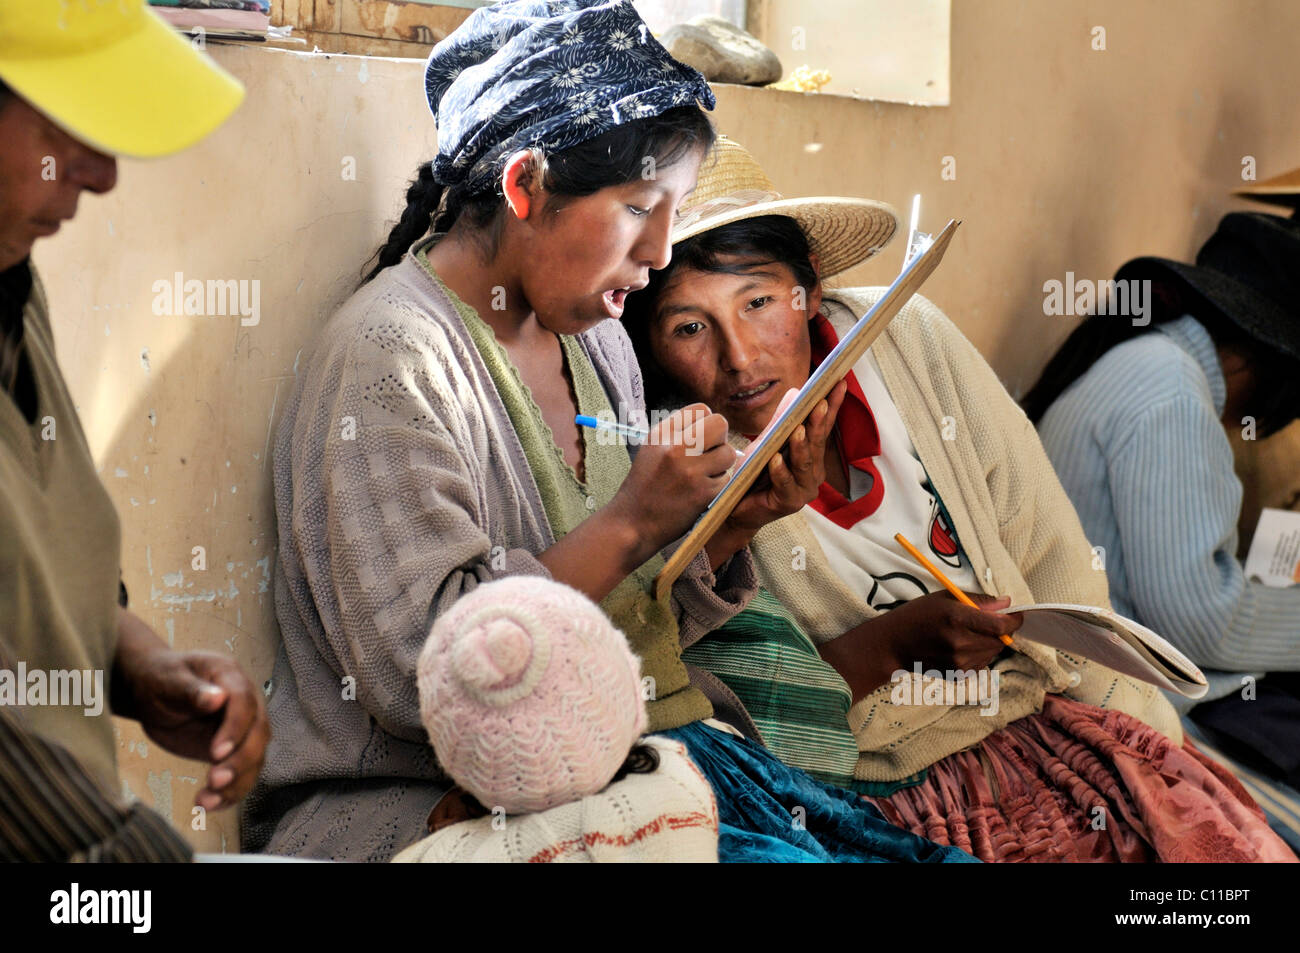 Women in traditional dress of the Quechua signing up for a course in the attendance list, Bolivian Altiplano highlands Stock Photo